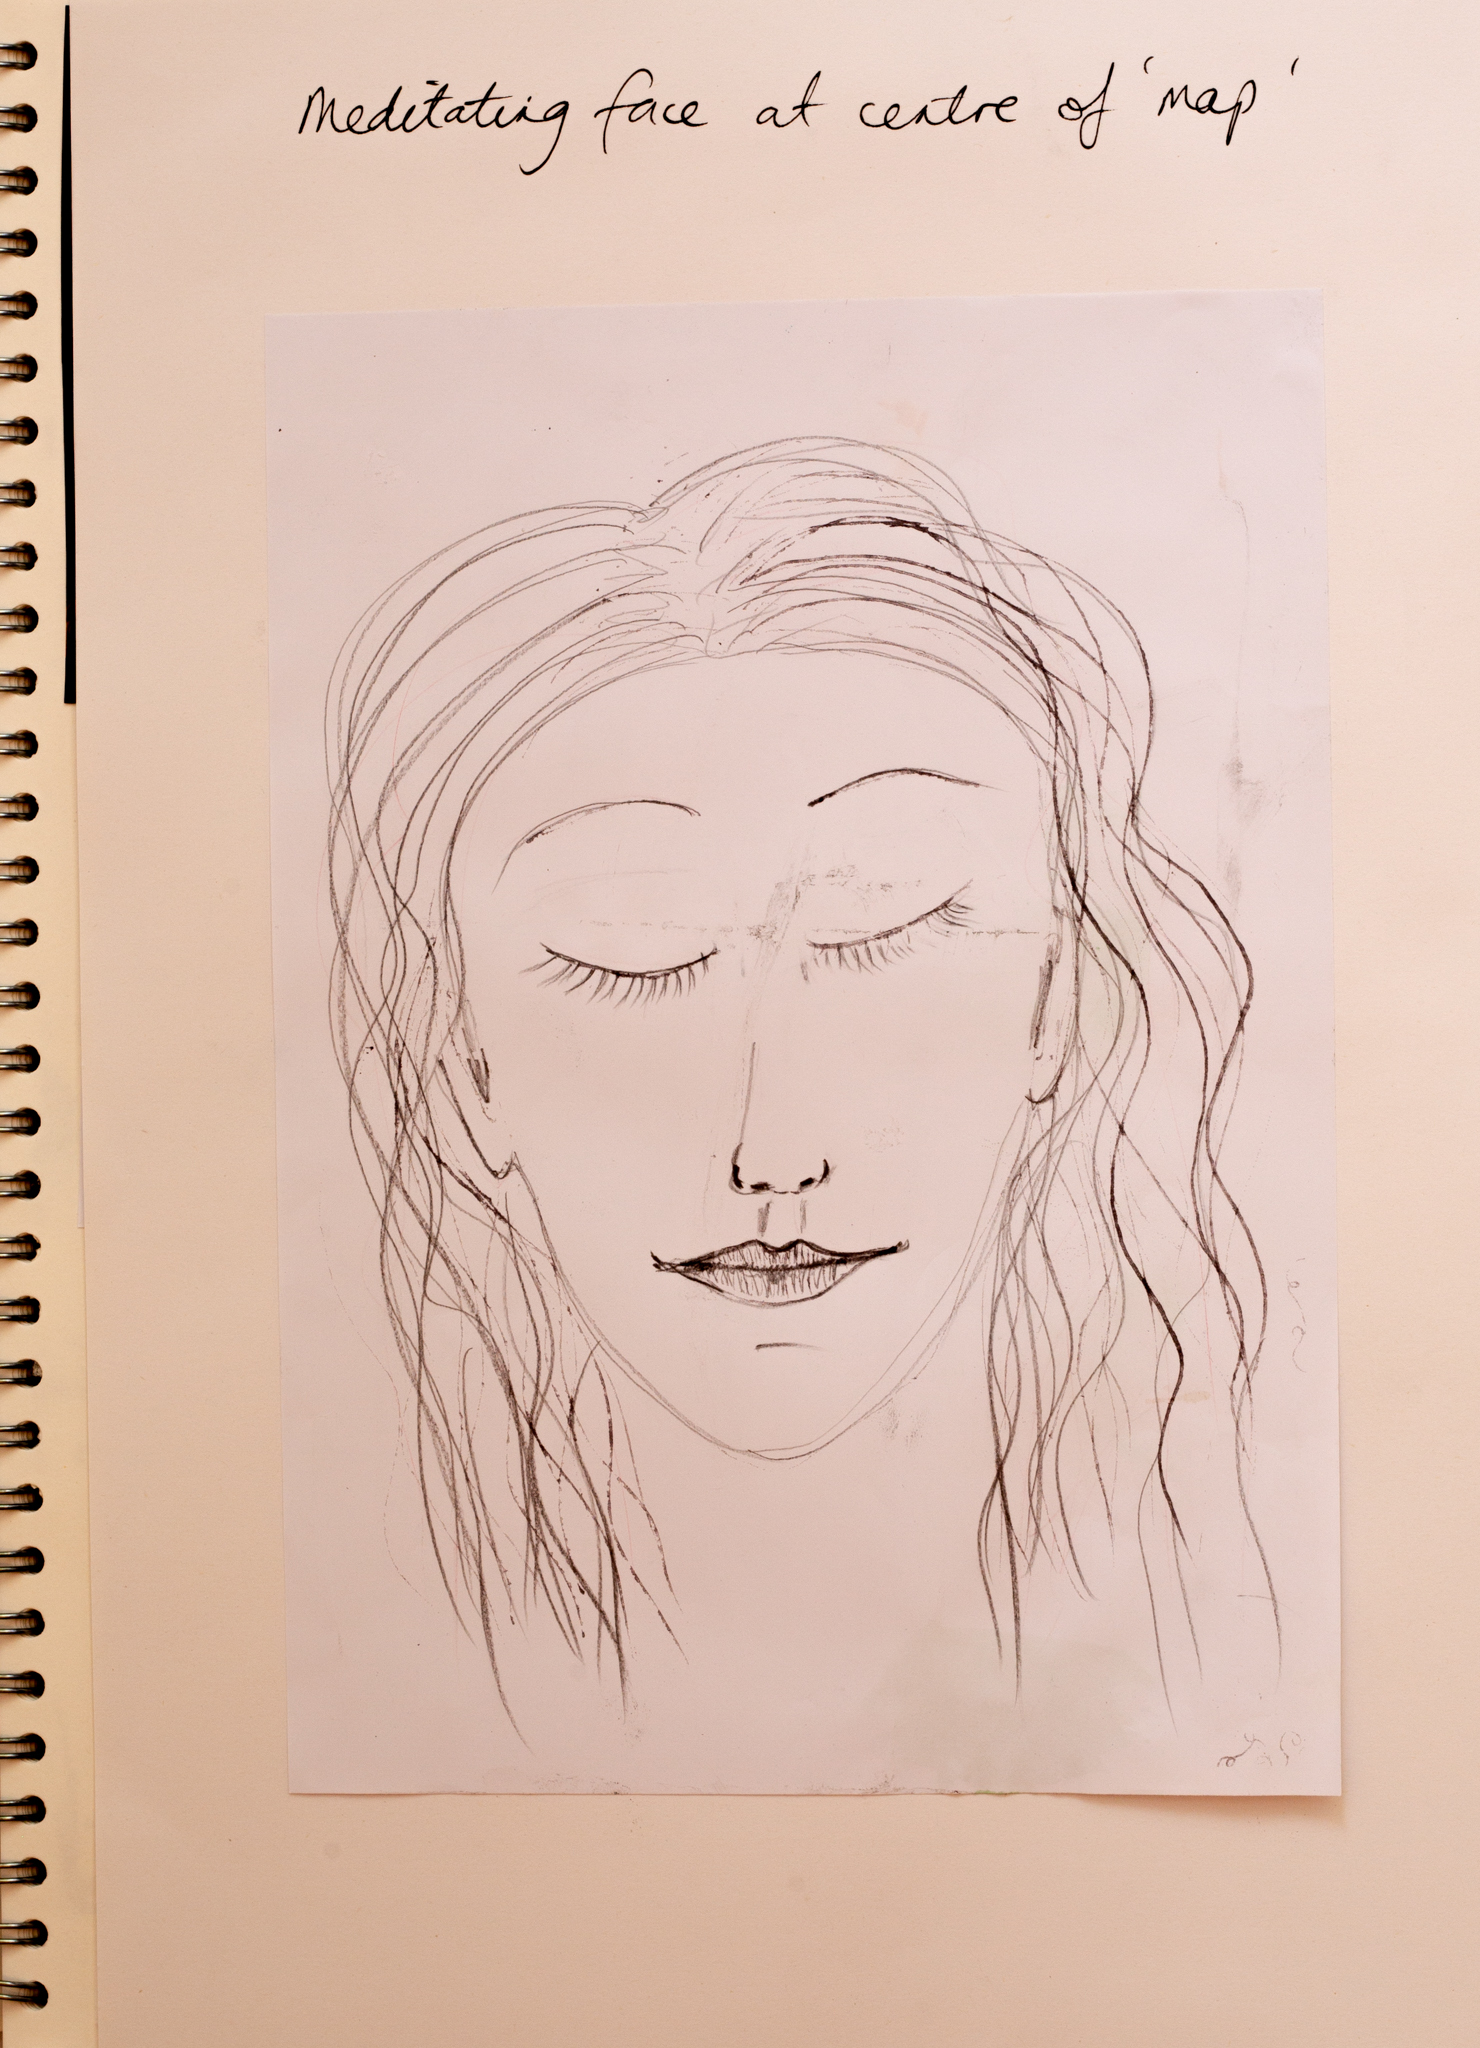 Very early on I had the idea for a meditating face to be the focal point of my map of mindfulness